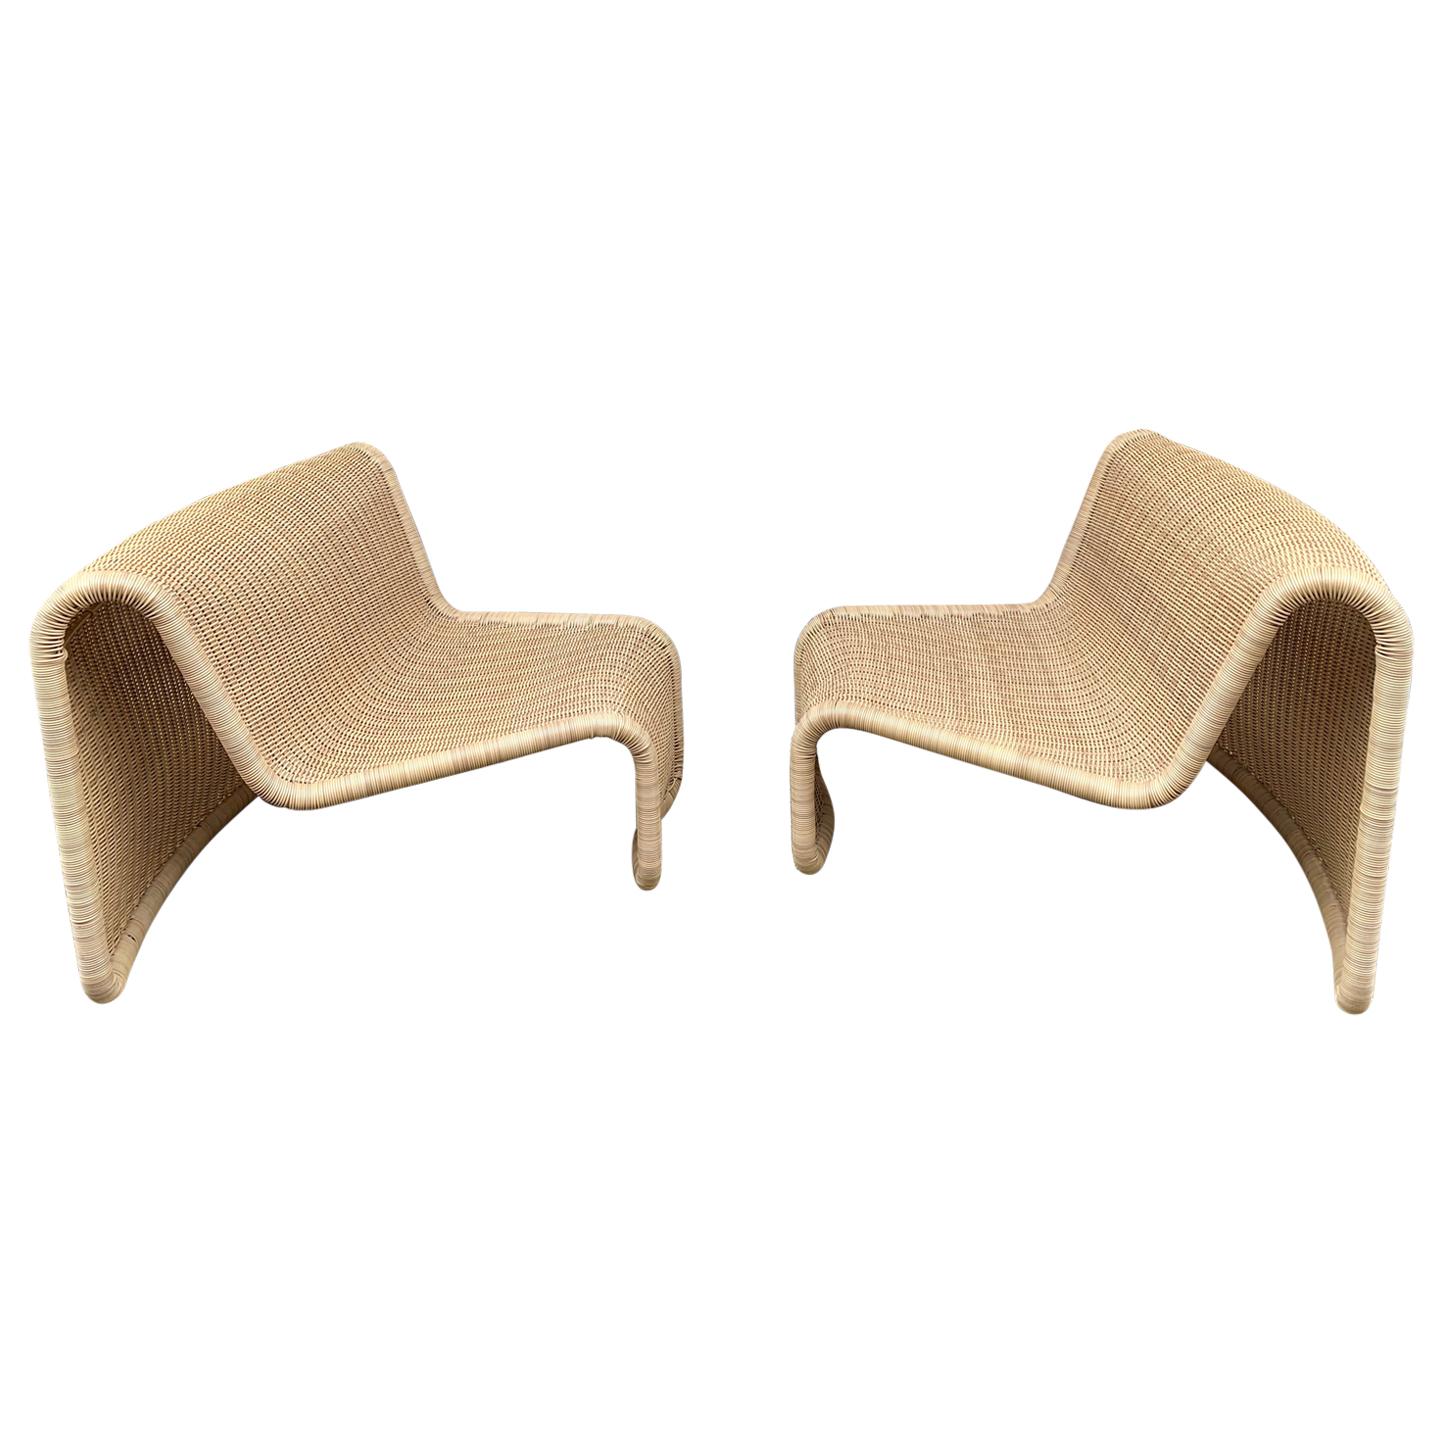 Pair of Rattan Slipper Chairs T by Tito Agnoli, Italy, 1970s